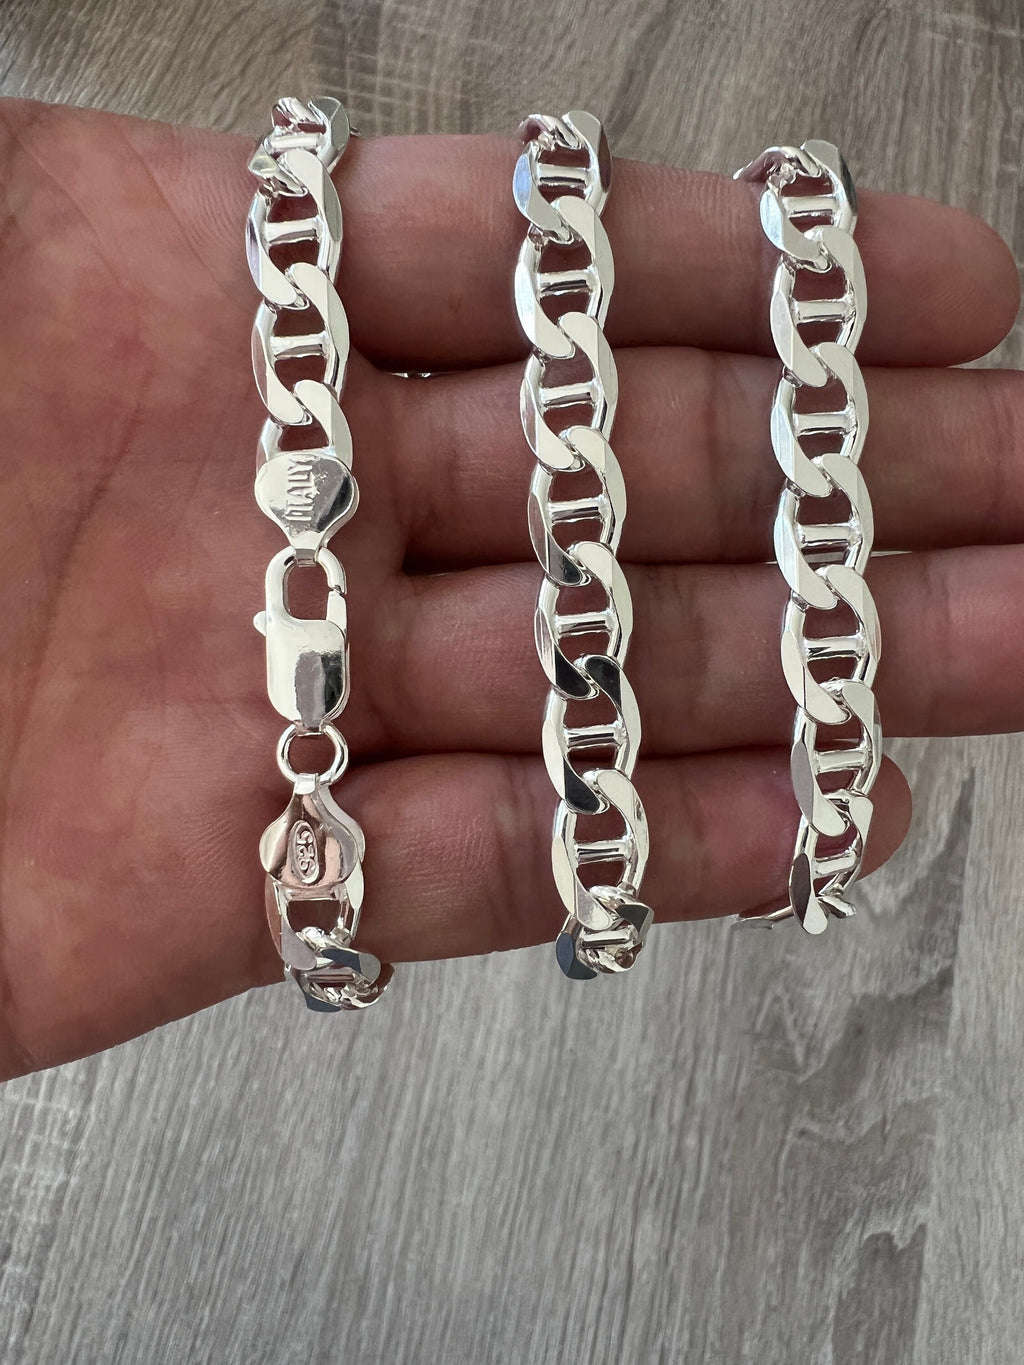 Men's Chain / Silver 8mm Rolo Chain Necklace for Women or Men